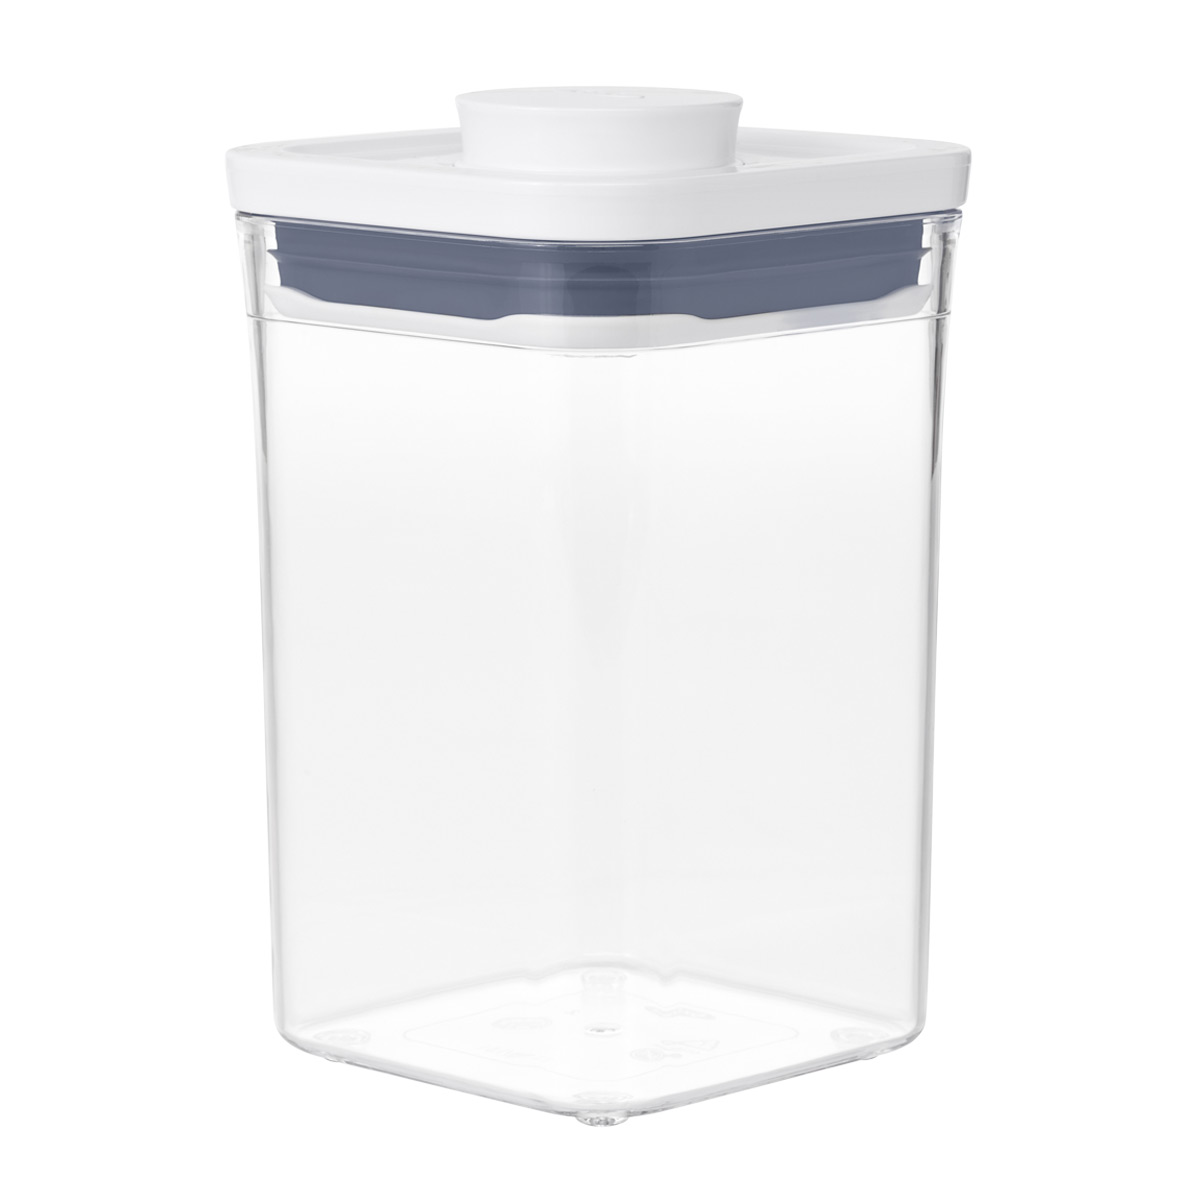 OXO 1.1 qt. Short Small Square POP Container Short